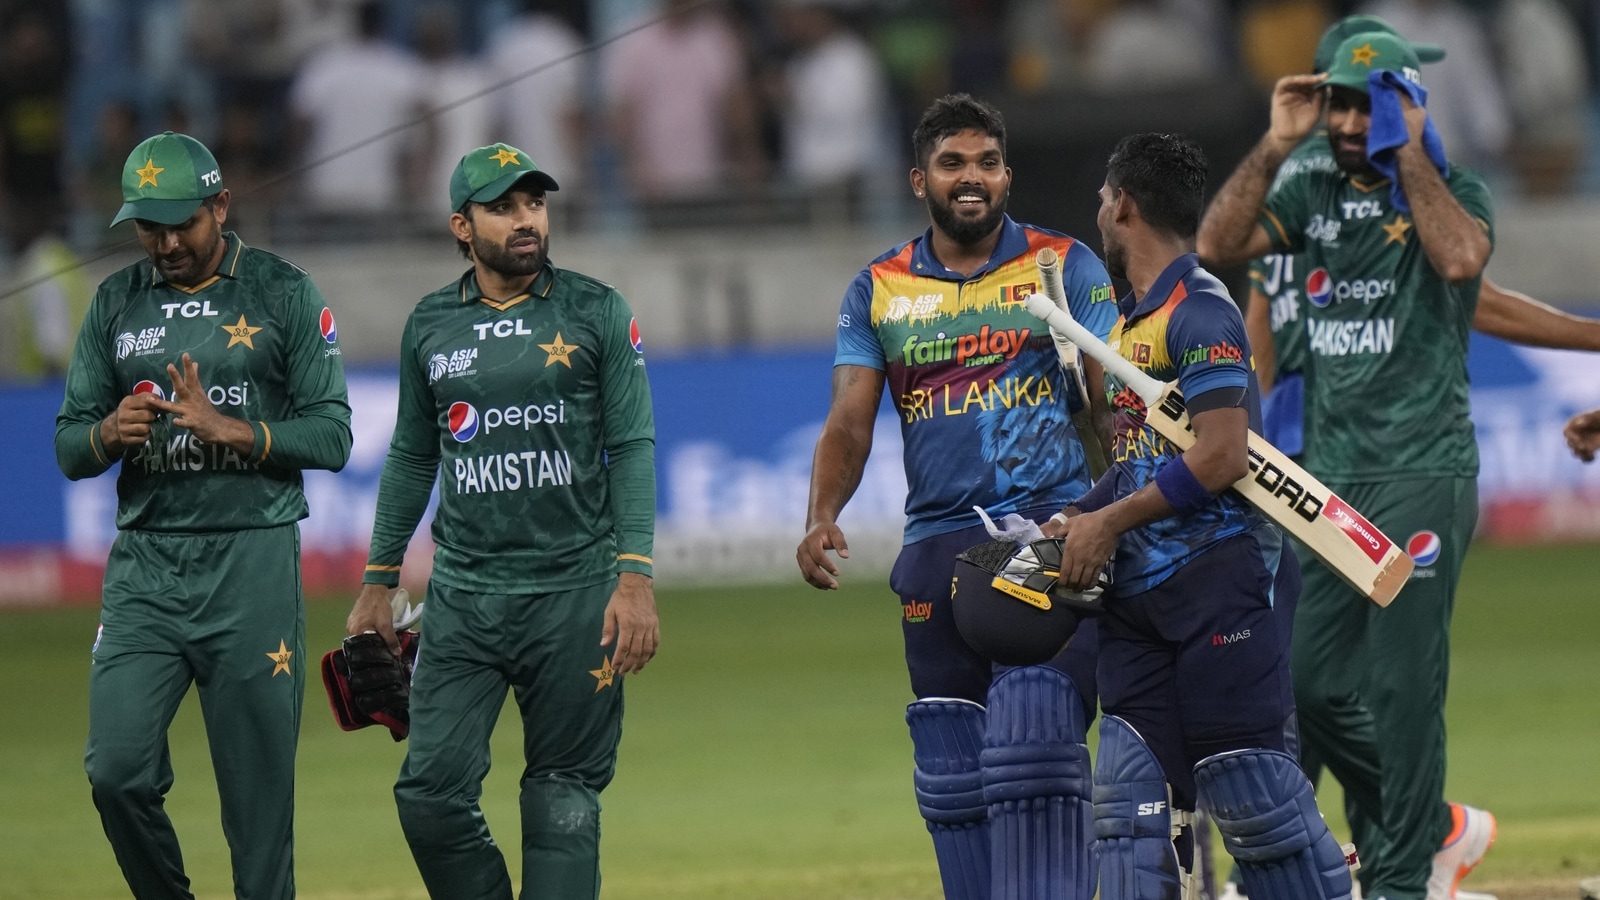 asia cup final 2022 live streaming